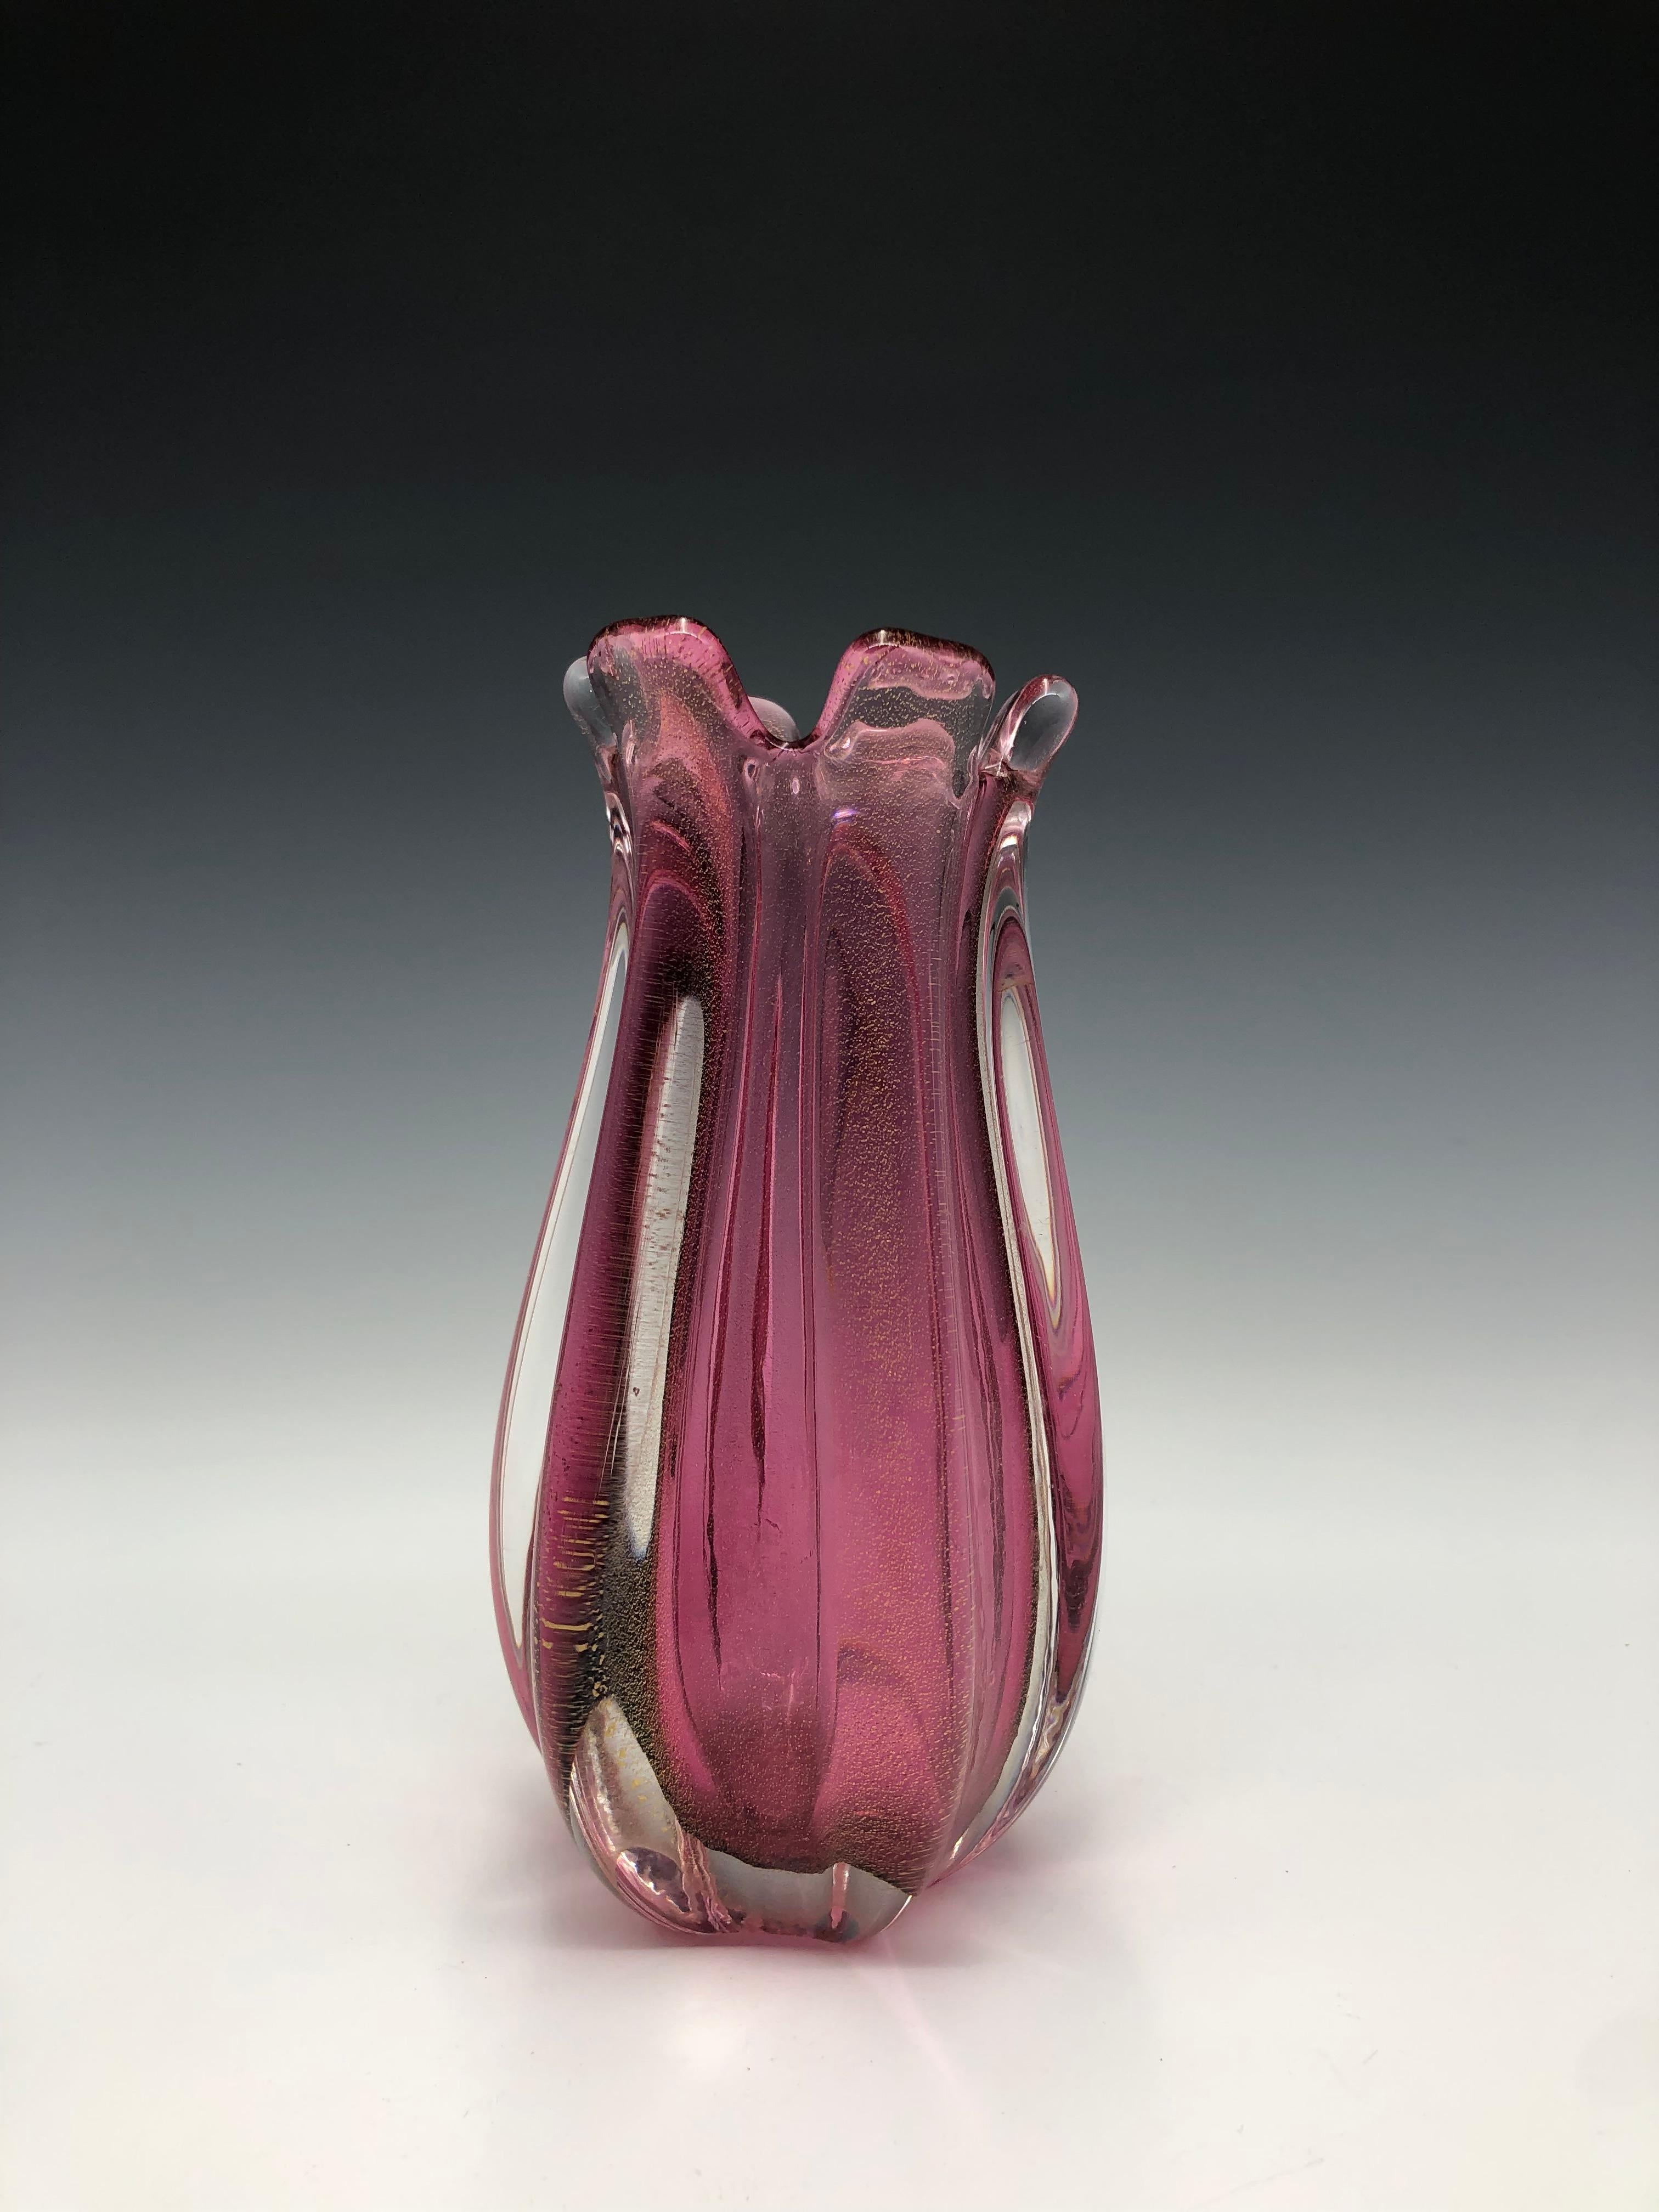 Stunning pink Murano ribbed gold specked glass Sommerso bud vase created in a traditional workshop on Murano island using a rare gold leaf technique, where 24K gold leaf is infused into cristallo glass under high temperatures inside special